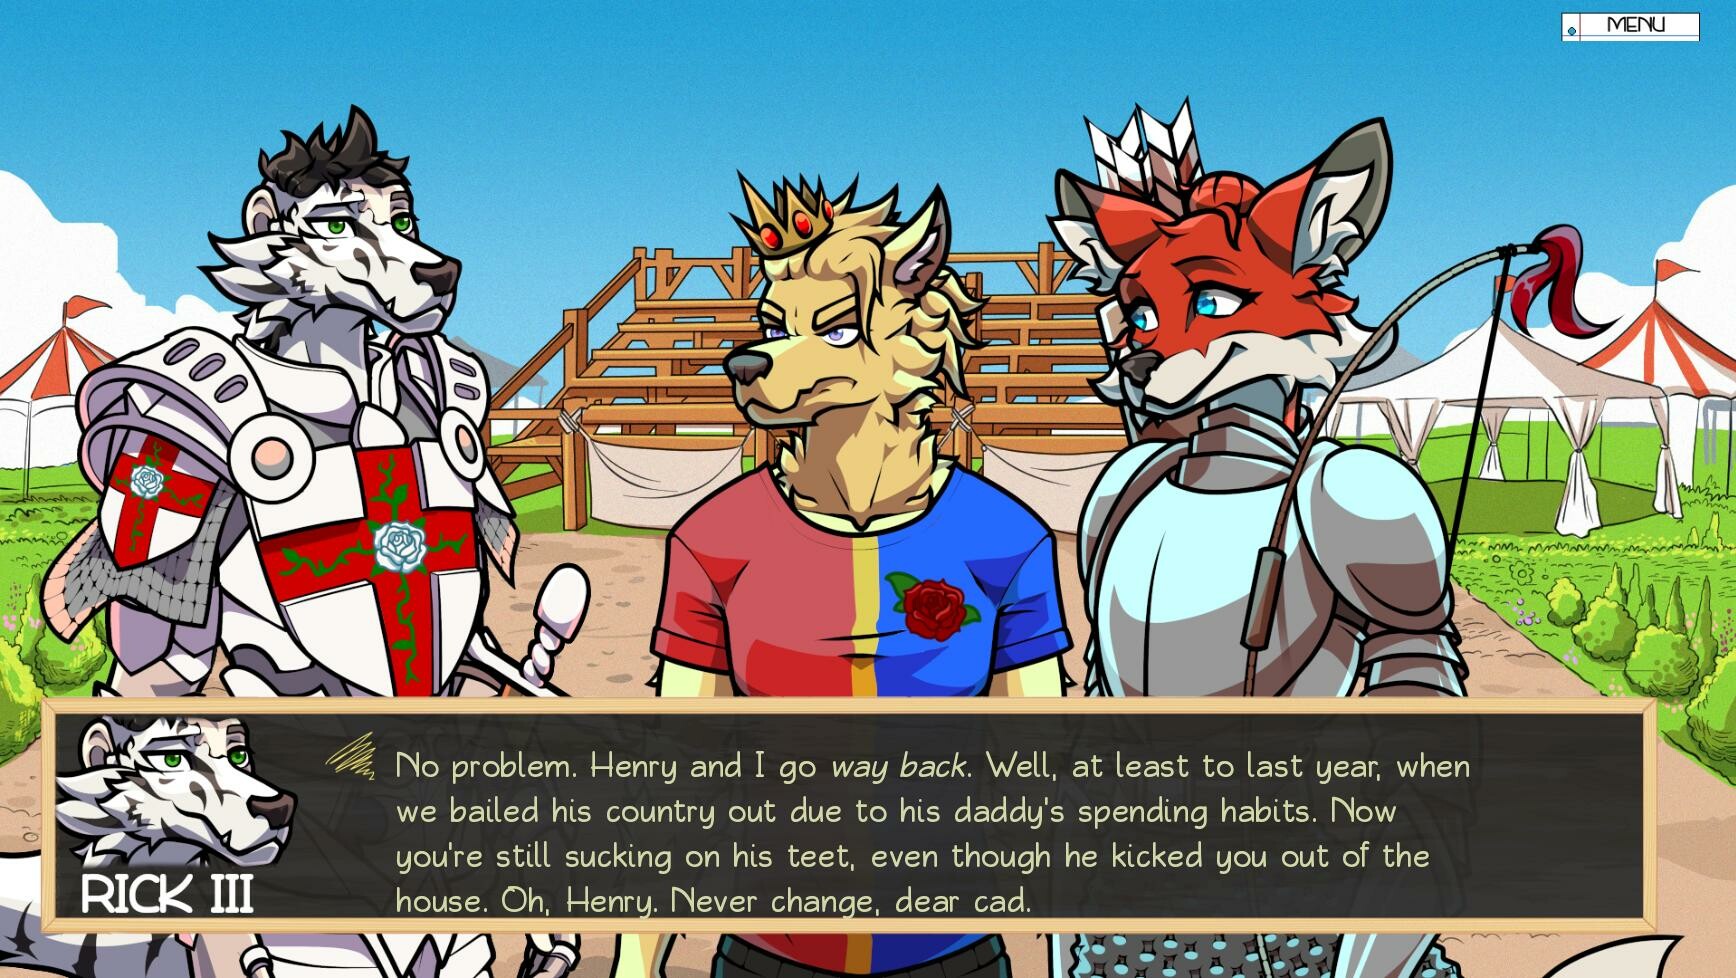 Furry Shakespeare: To Date Or Not To Date Cat Girls? 2: Prophecy of Convenience Featured Screenshot #1